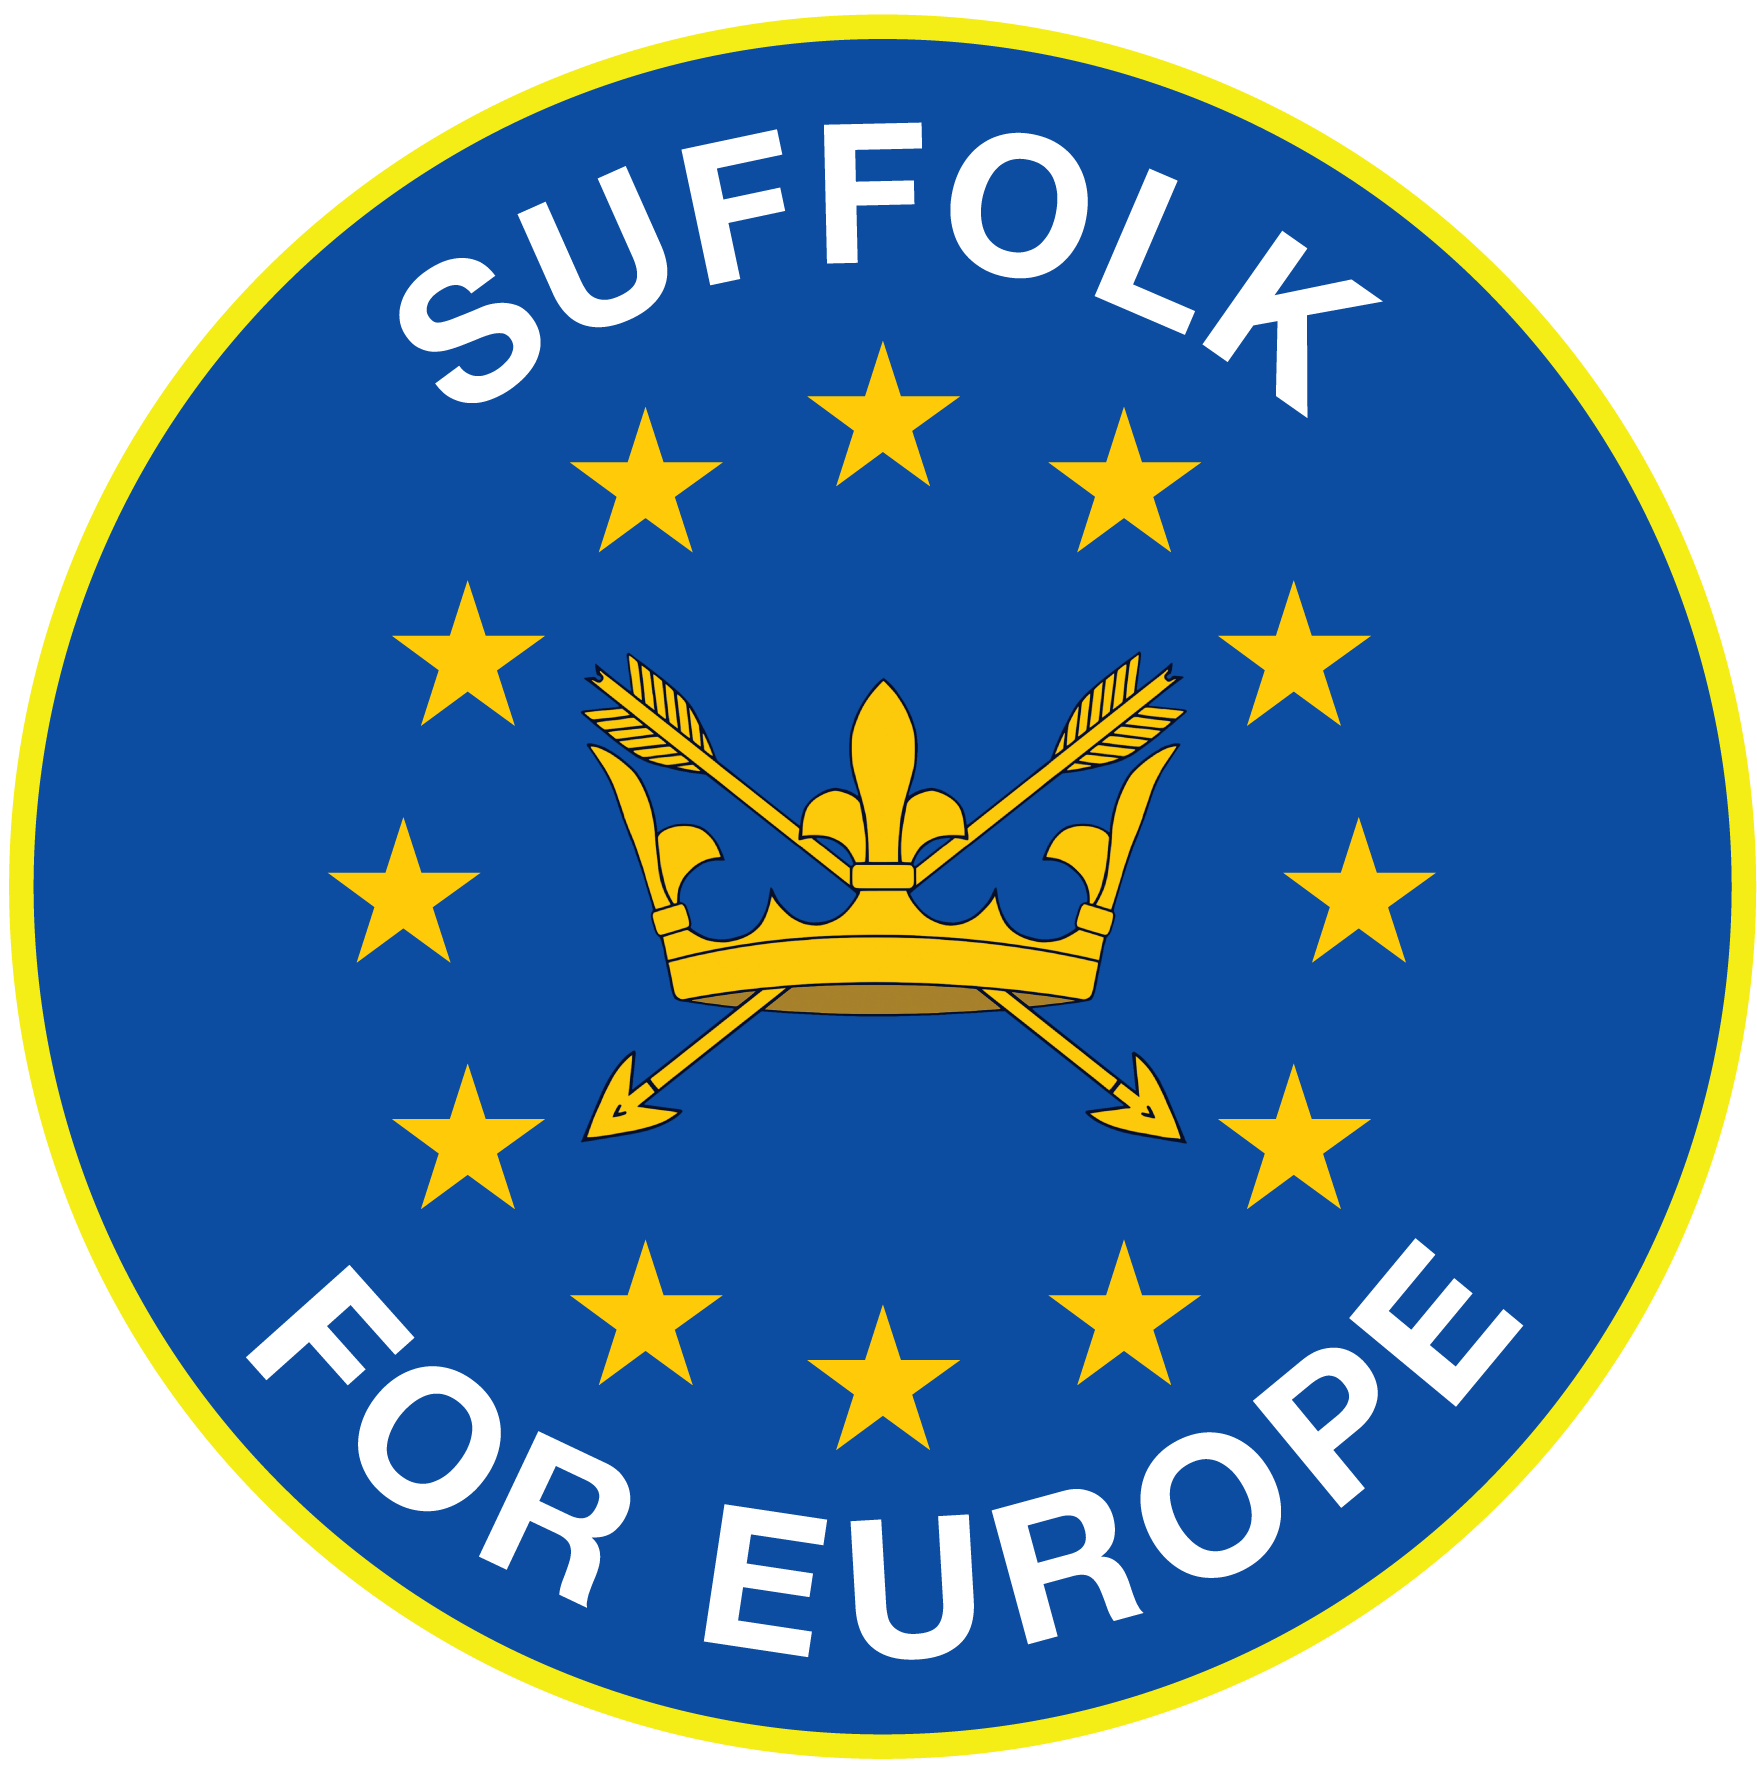 Suffolk for Europe